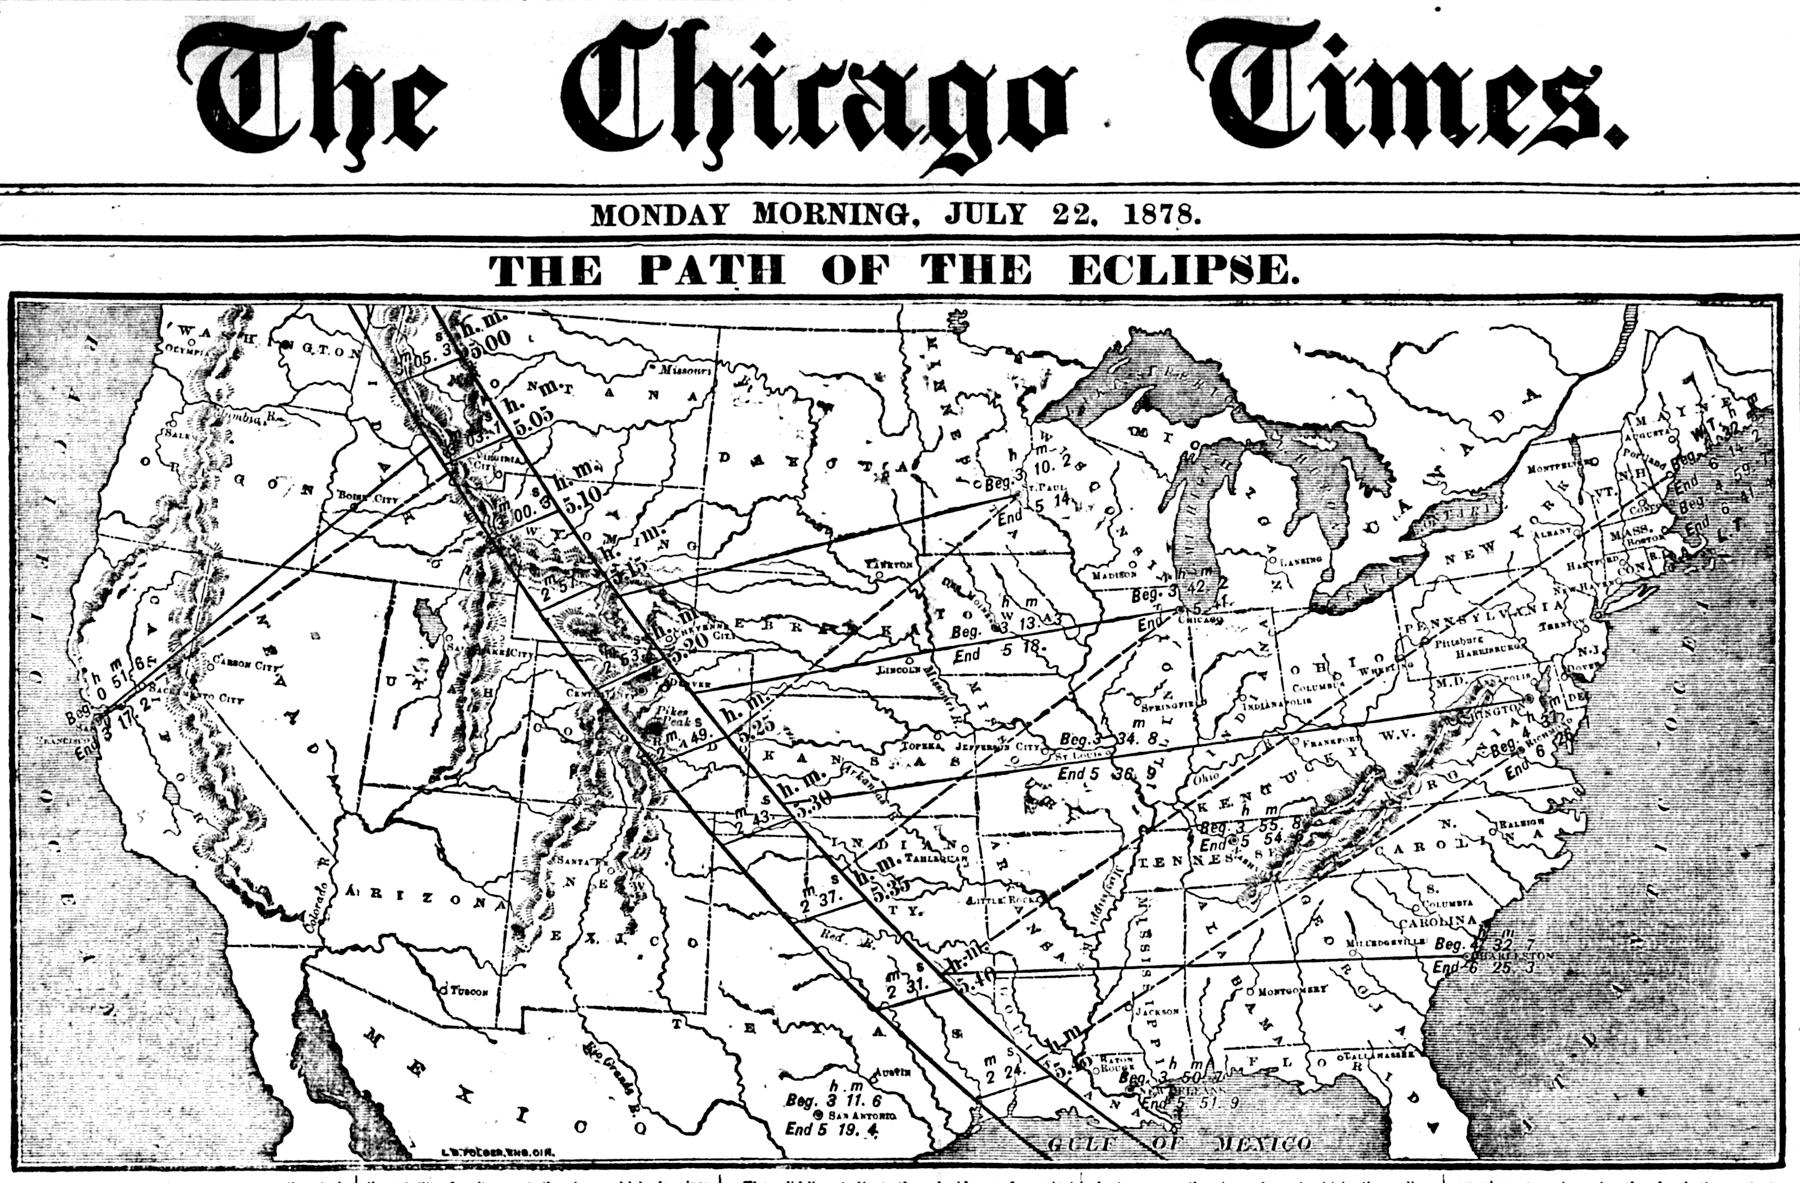 Archival image, Chicago Times, July 22, 1878